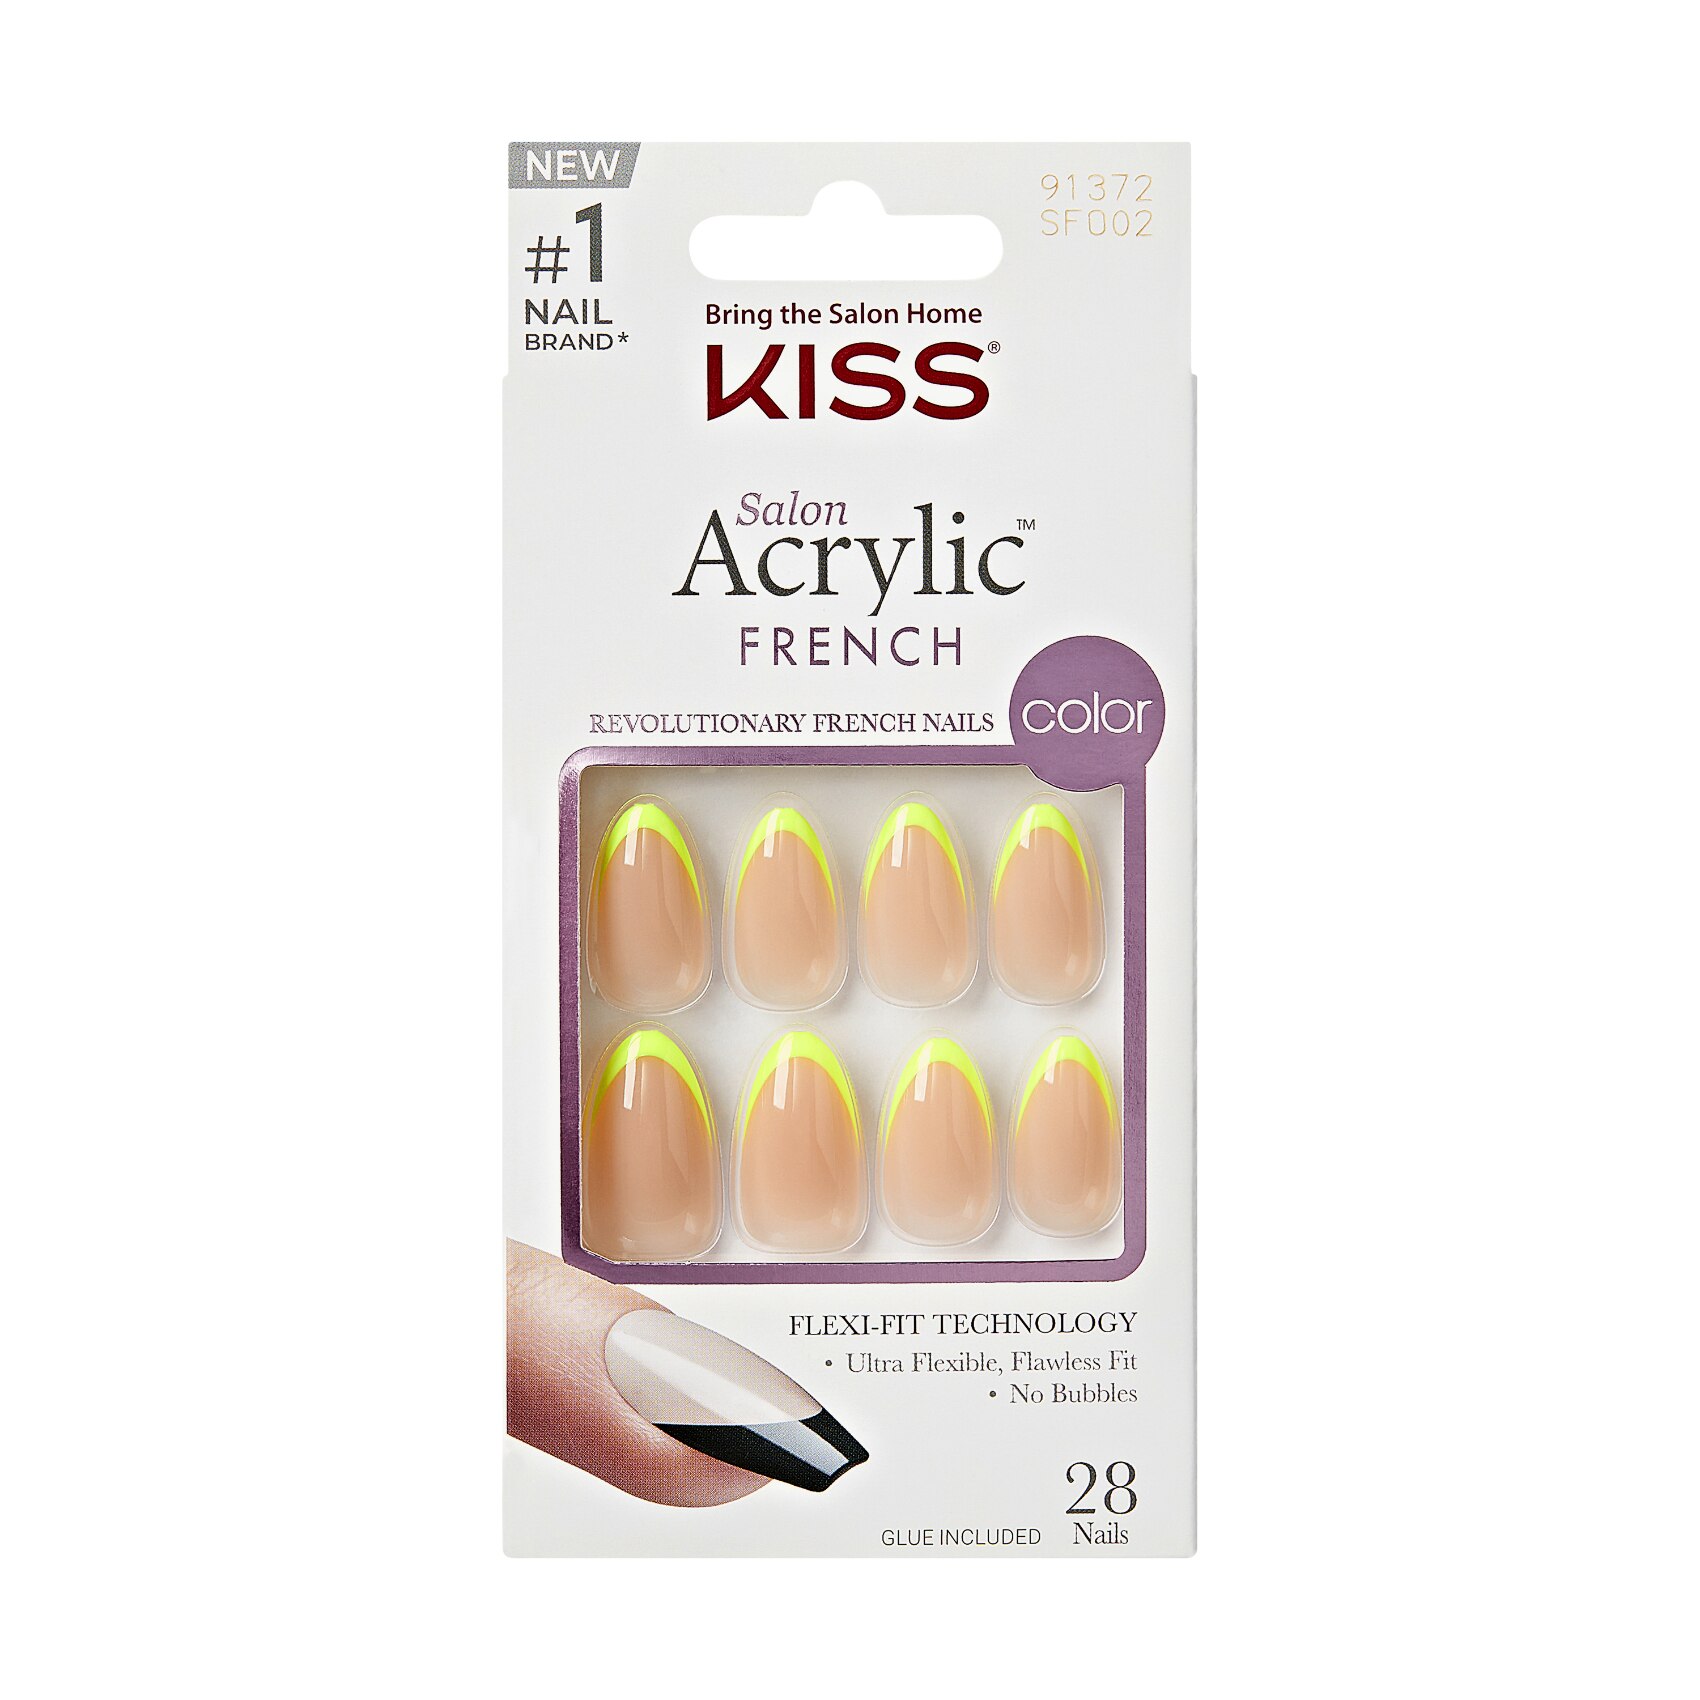 KISS French Color, Hype , CVS